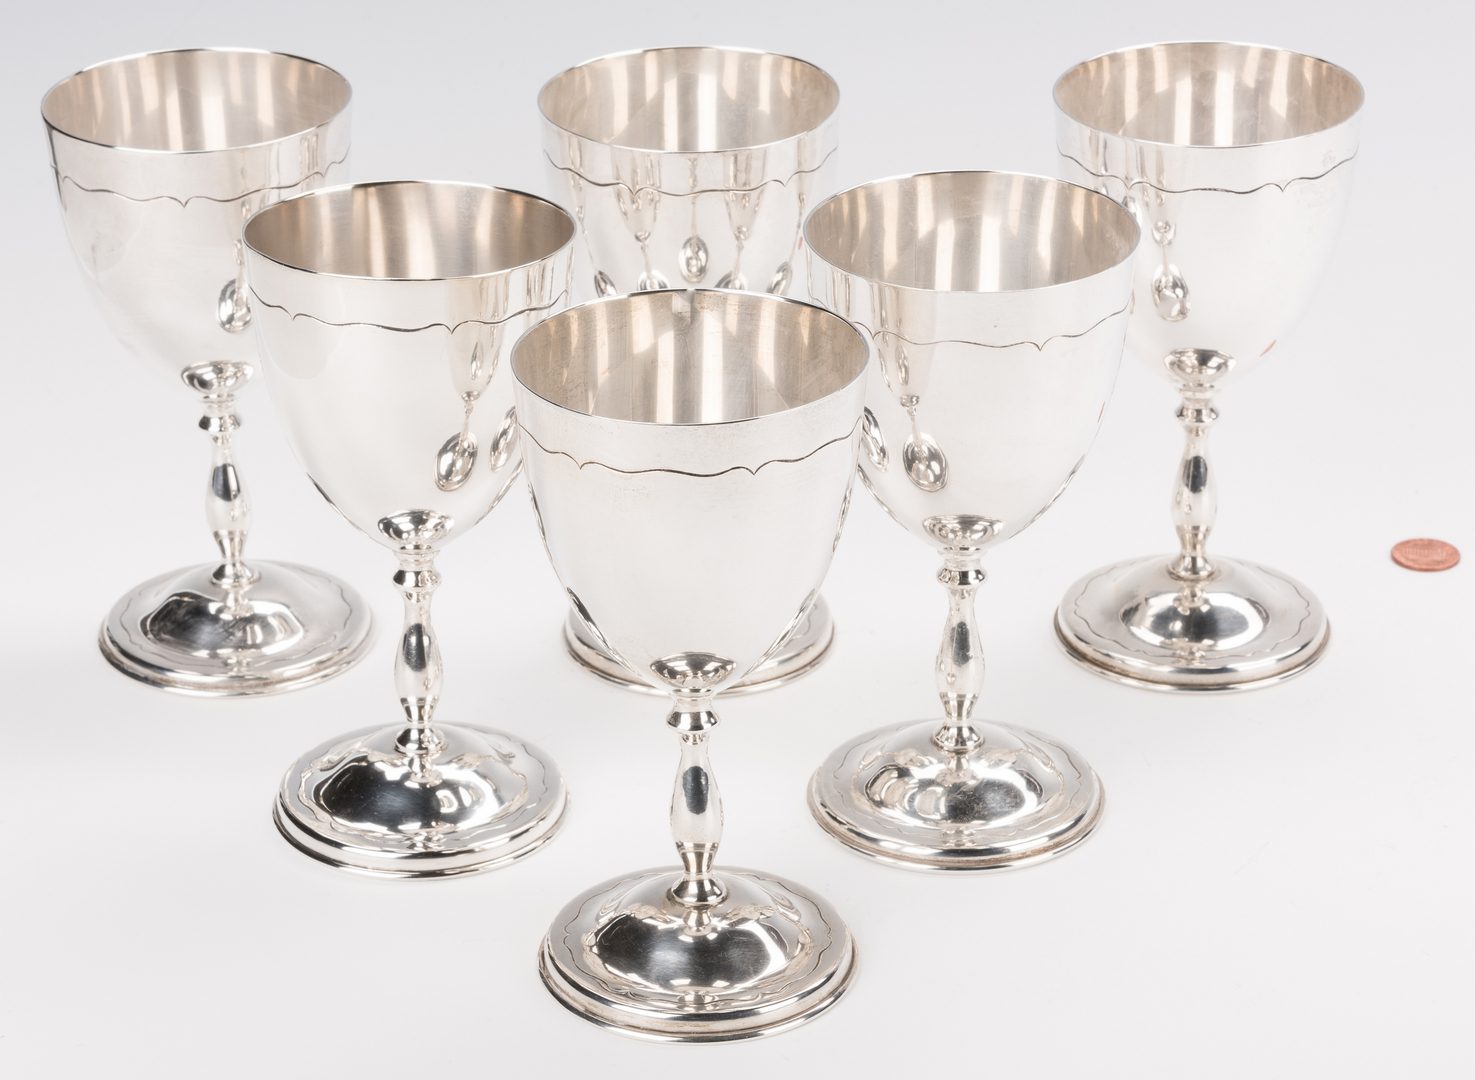 Lot 403: Mexican plus other Sterling Stemware, 17 pcs